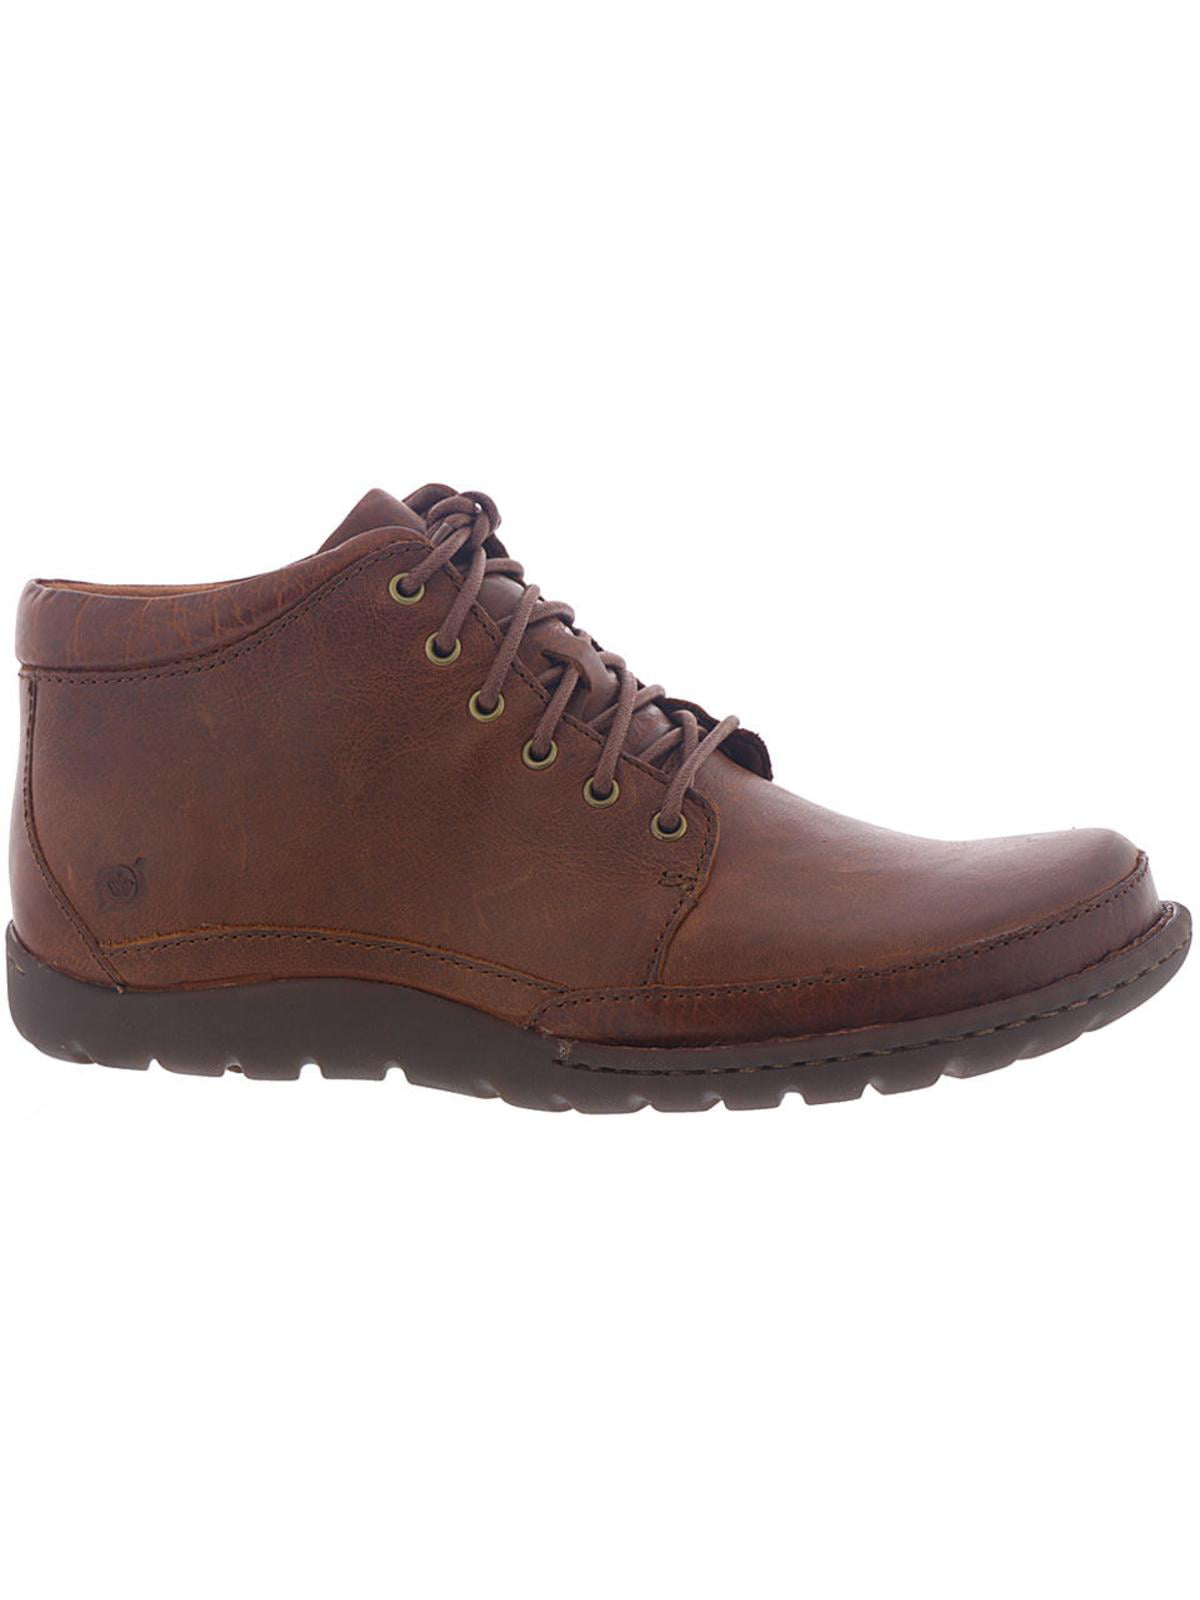 Born - Born Mens Nigel Leather Ankle Lace-Up Boot - Walmart.com ...